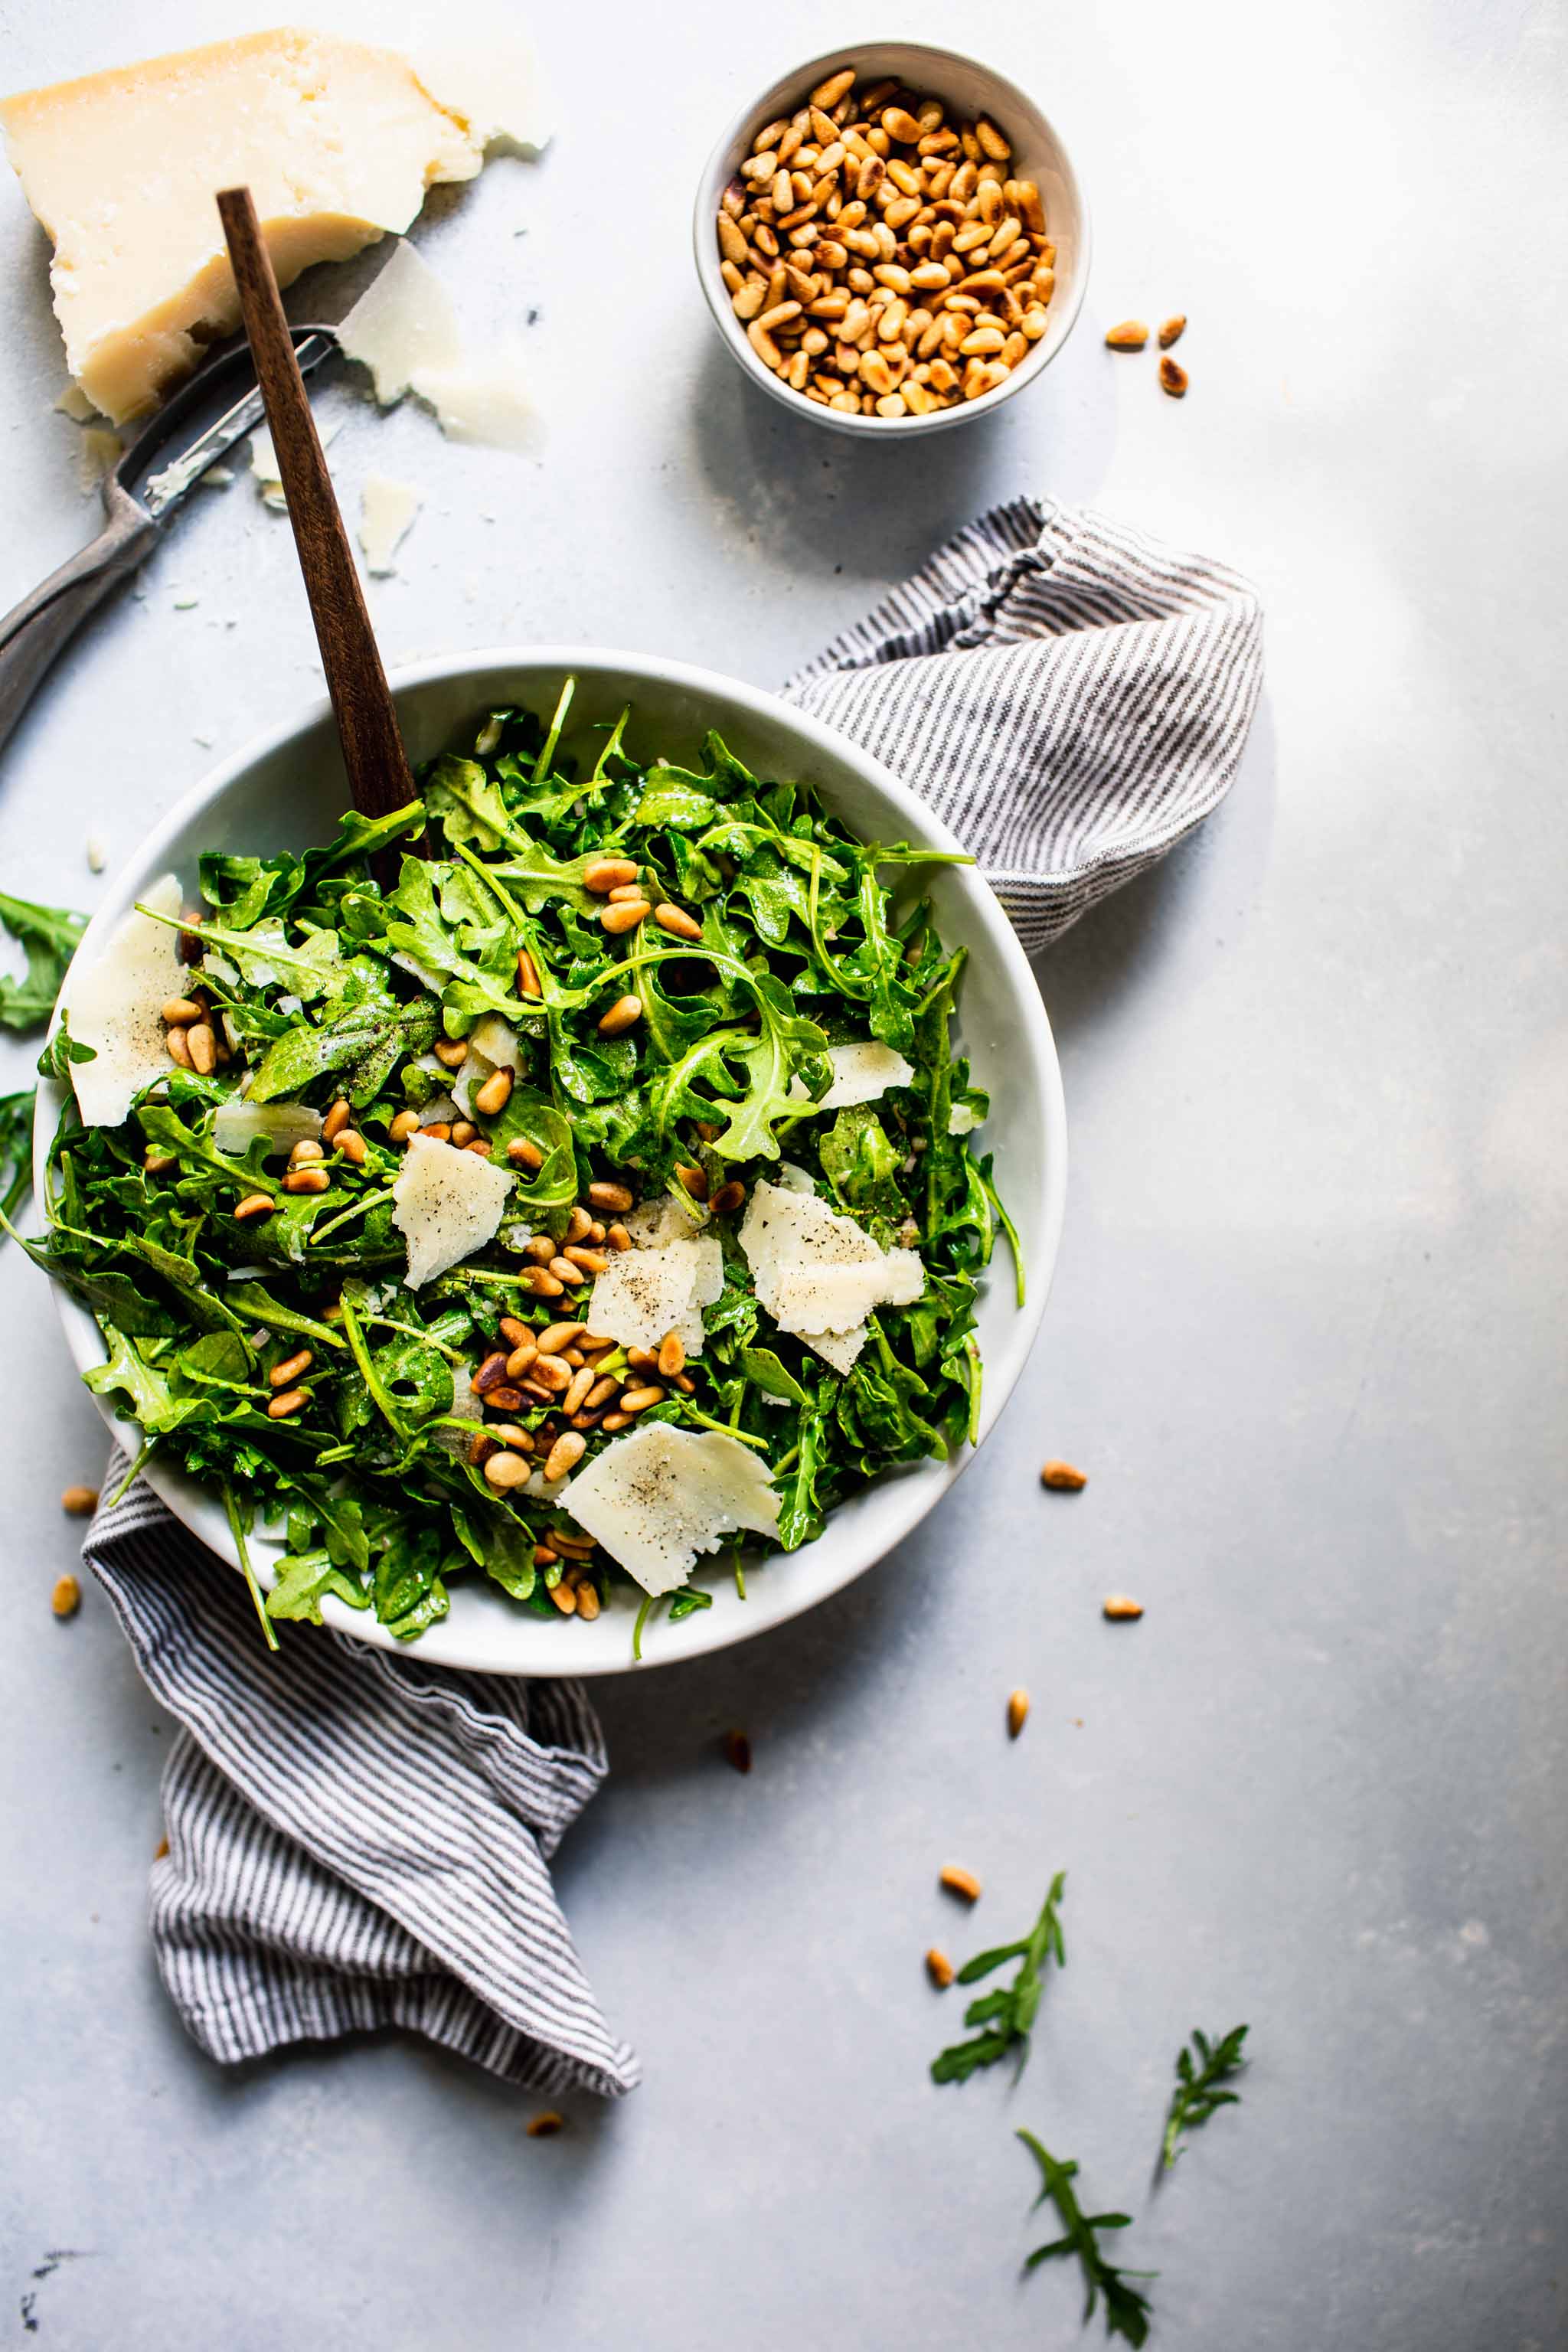 Overhead shot of arugula salad next to shaved parmesan and bowl of pine nuts.